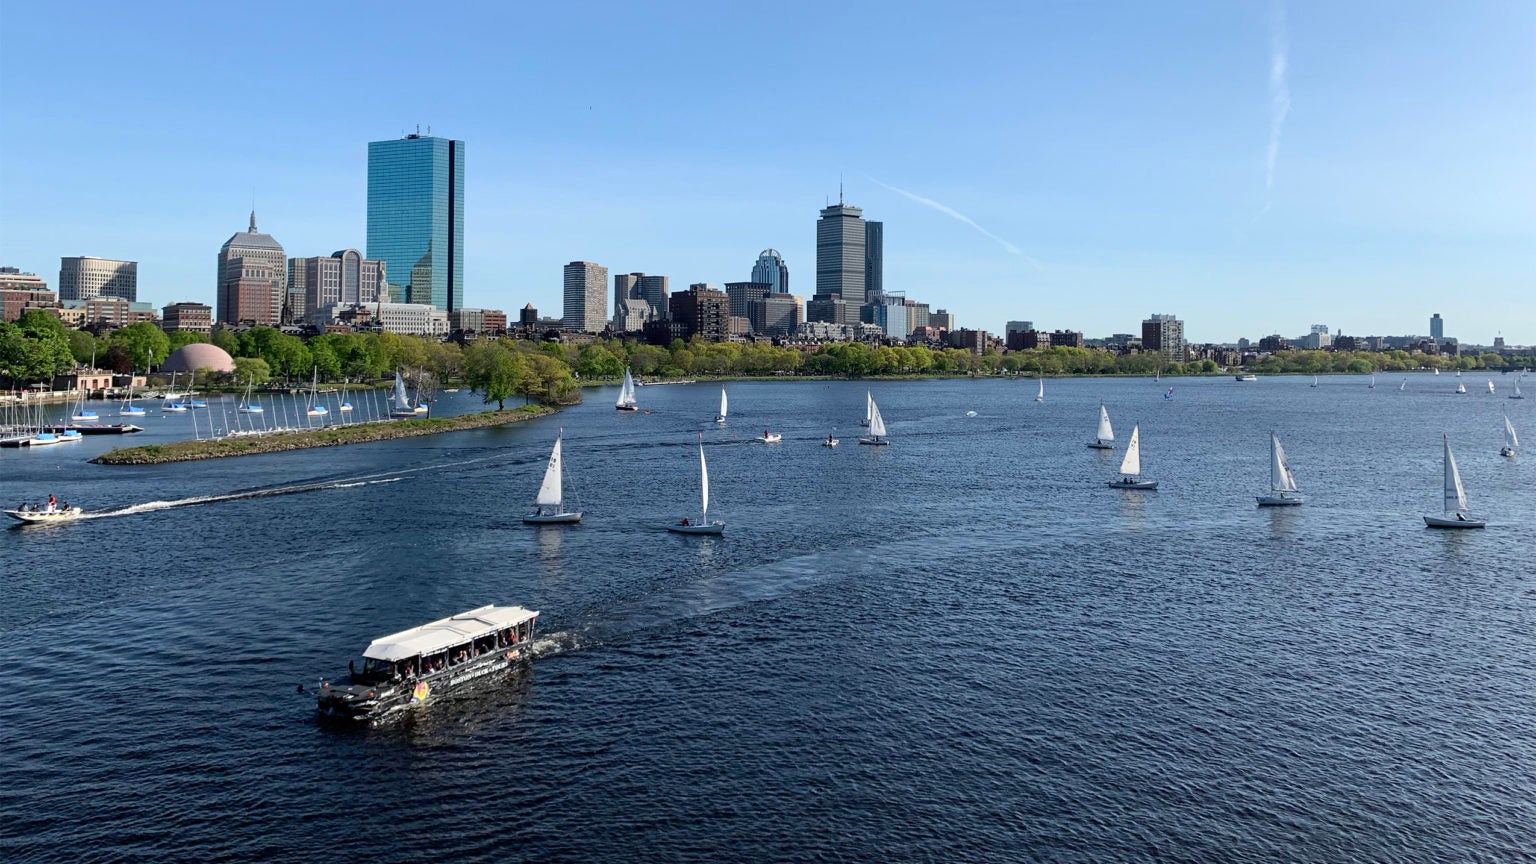 The Charles River with sailboats on the water and the Boston skyline in the background